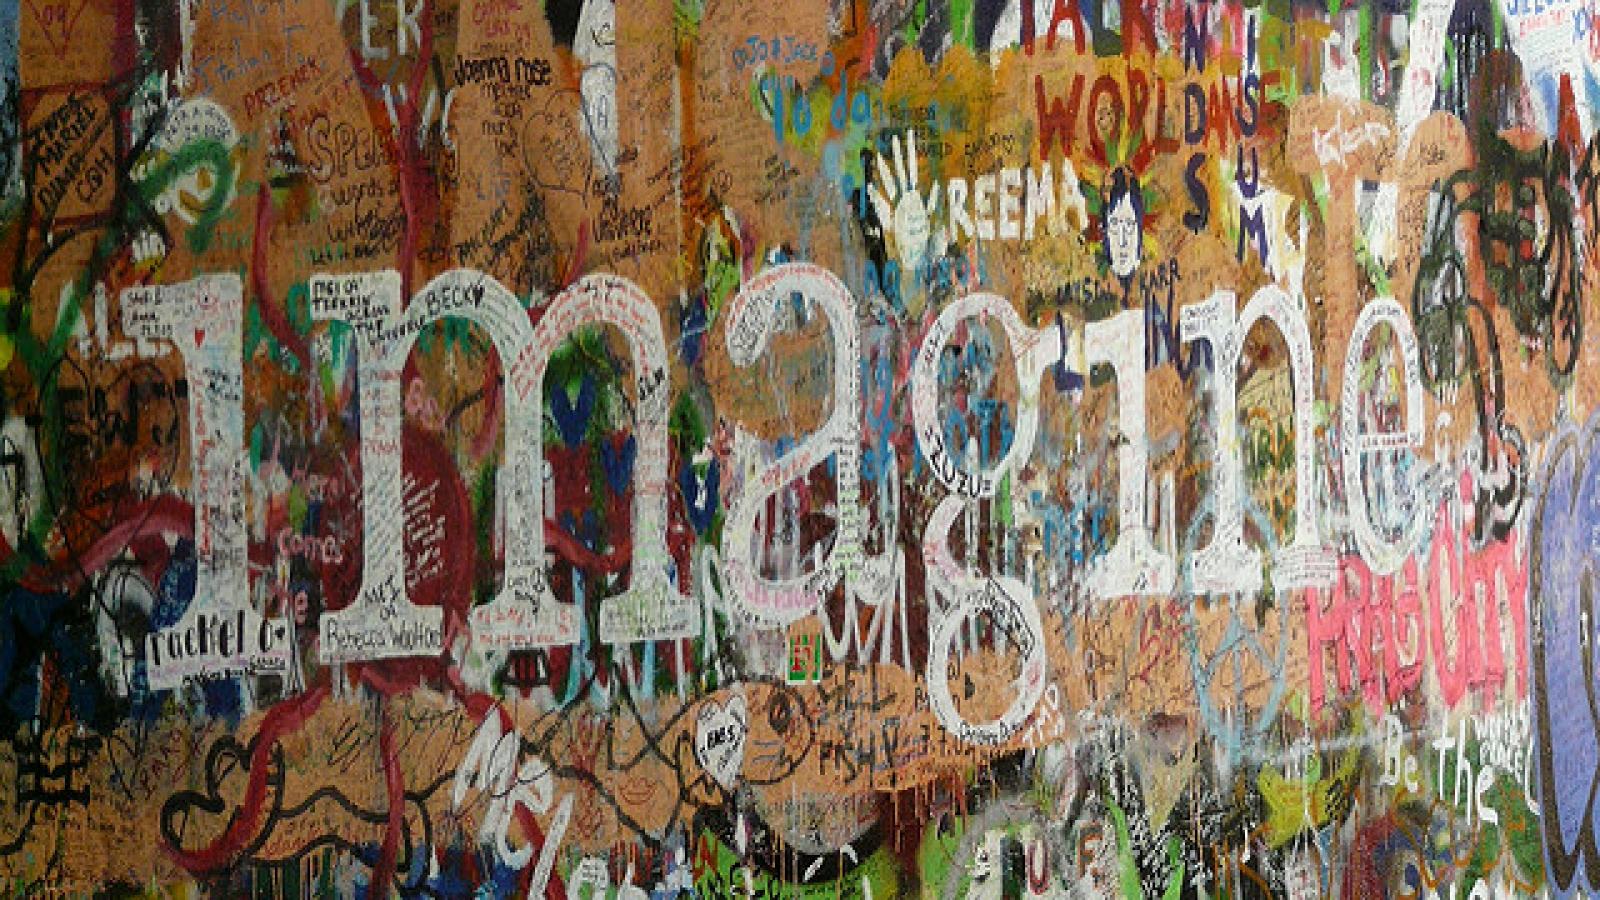 Word Imagine on wall with graffiti 